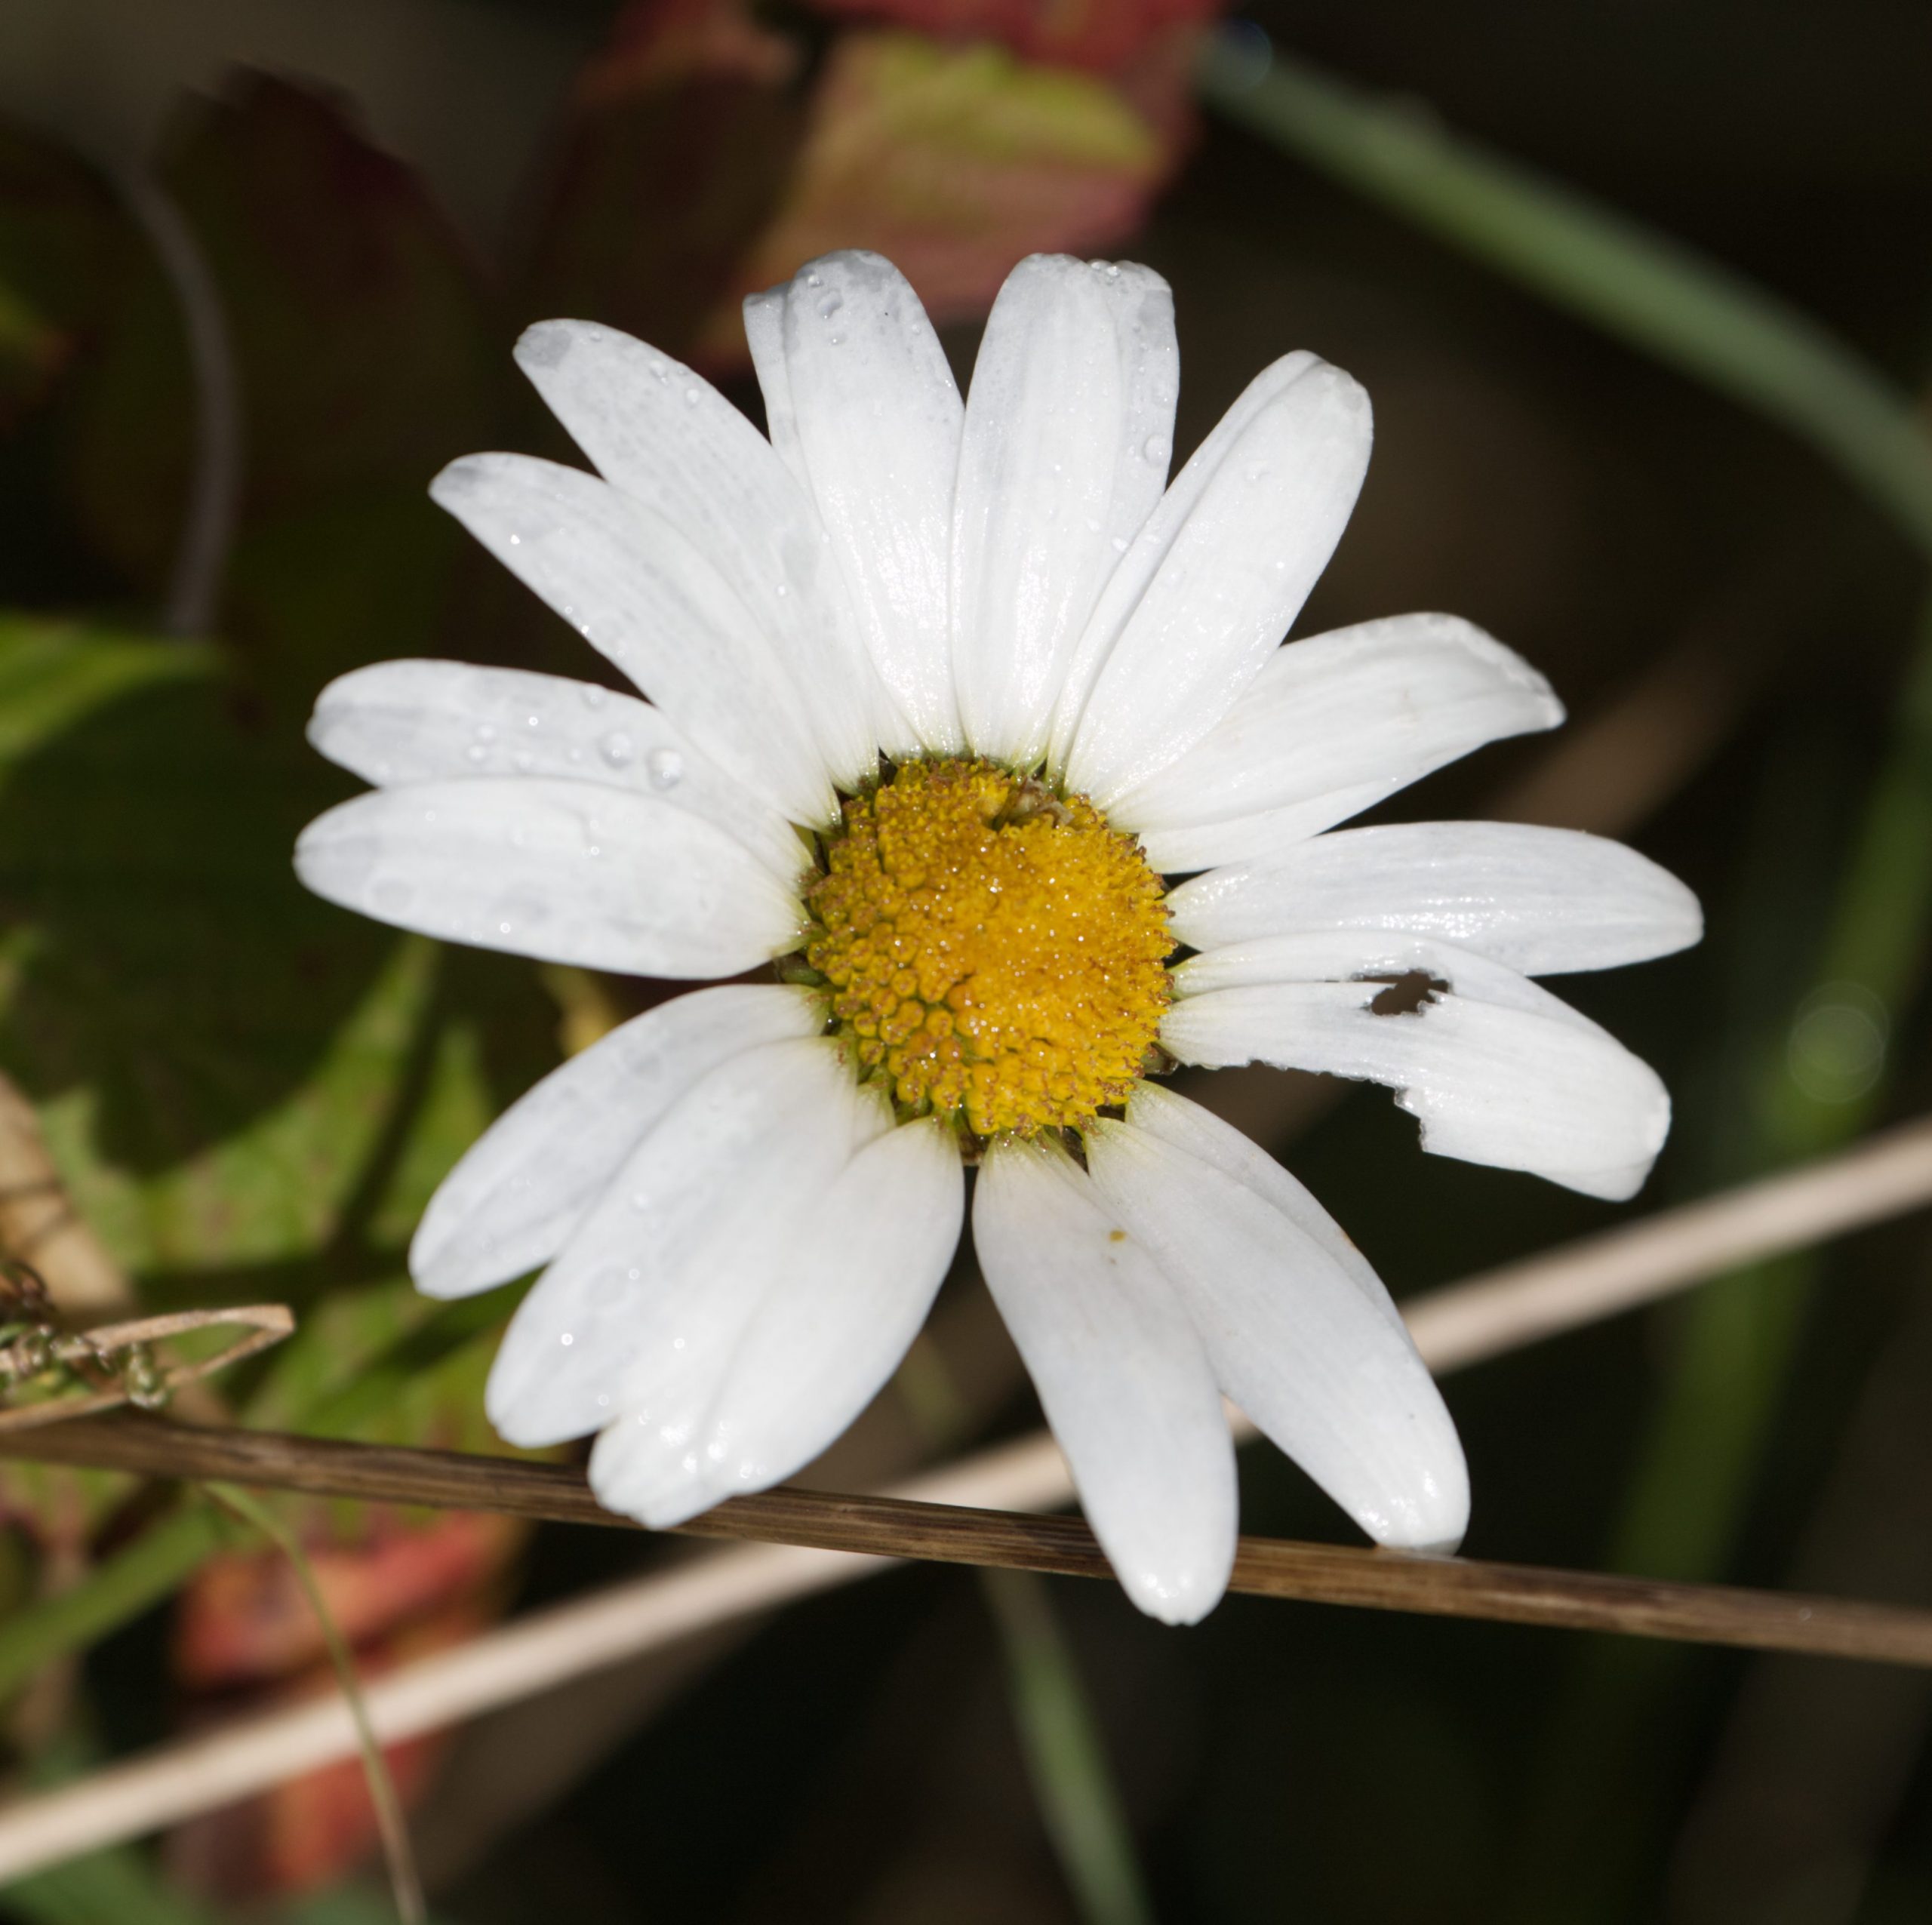 A close-ip image of an oxeye daisy. 16 long white petals arranged around a cluster of yellow florets forming a a mounded disc at the centre.